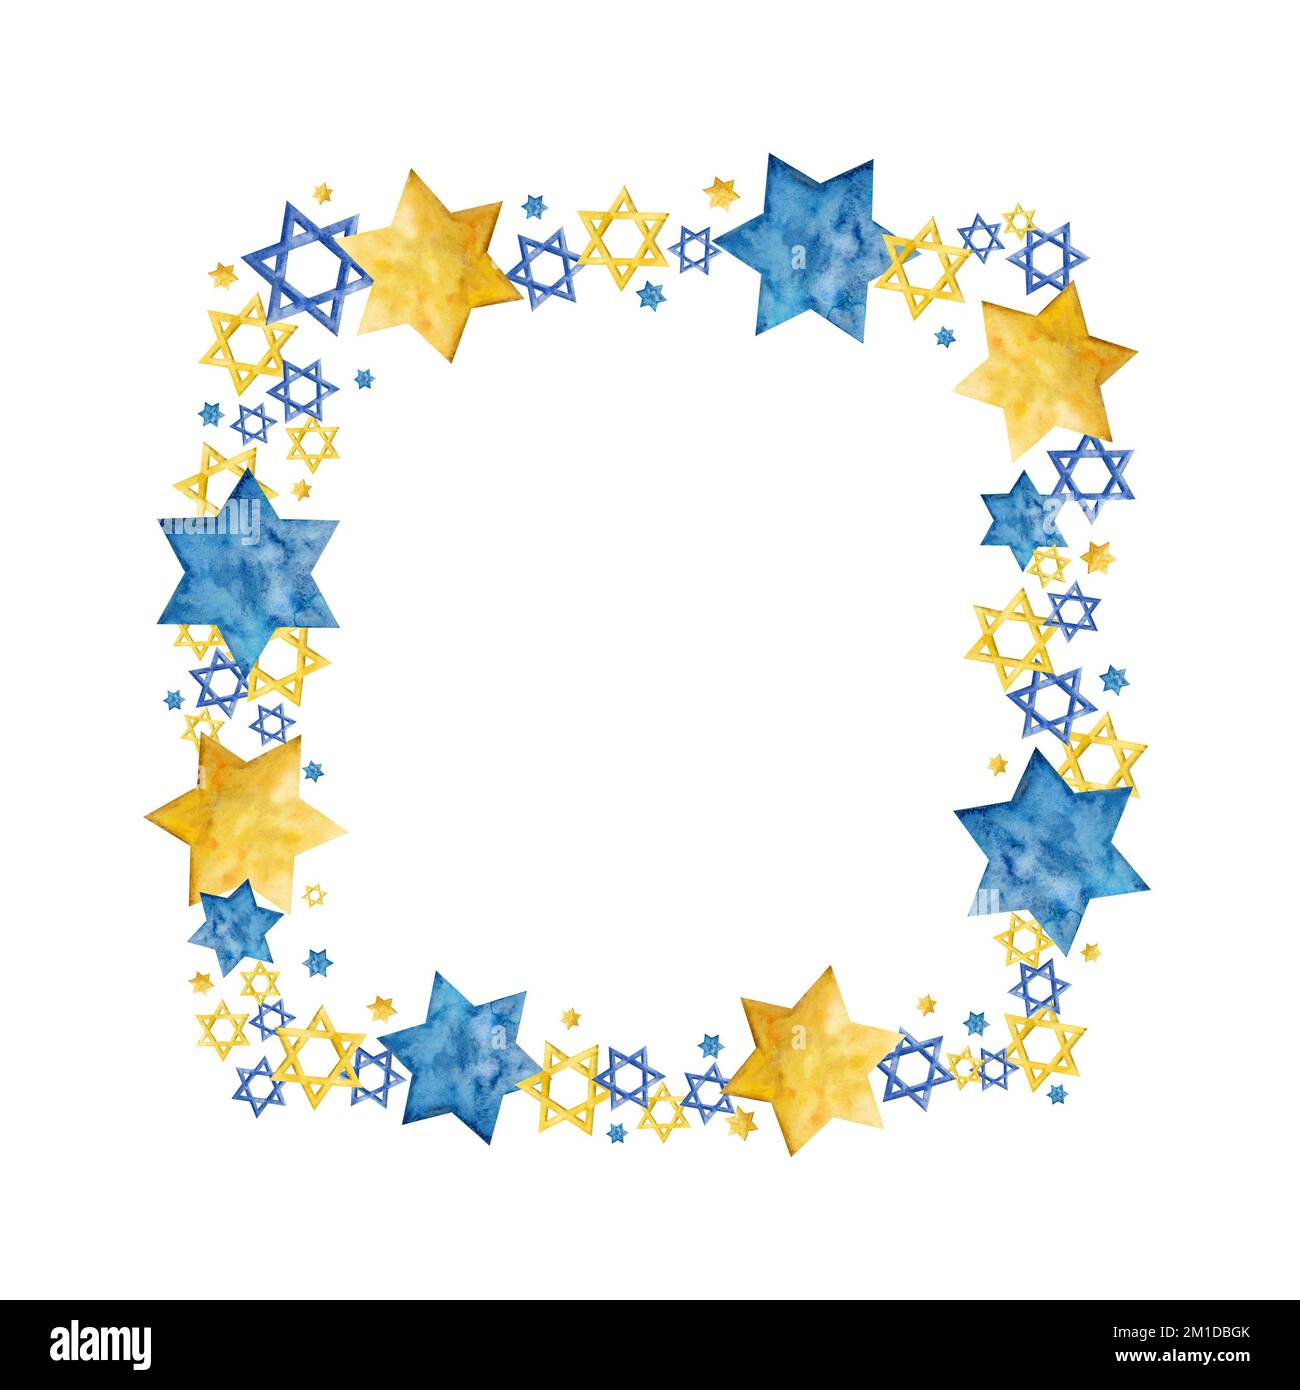 Jewish square border frame with David stars in blue and yellow gold colors on white background. Watercolor Hanukkah holiday illustration Stock Photo